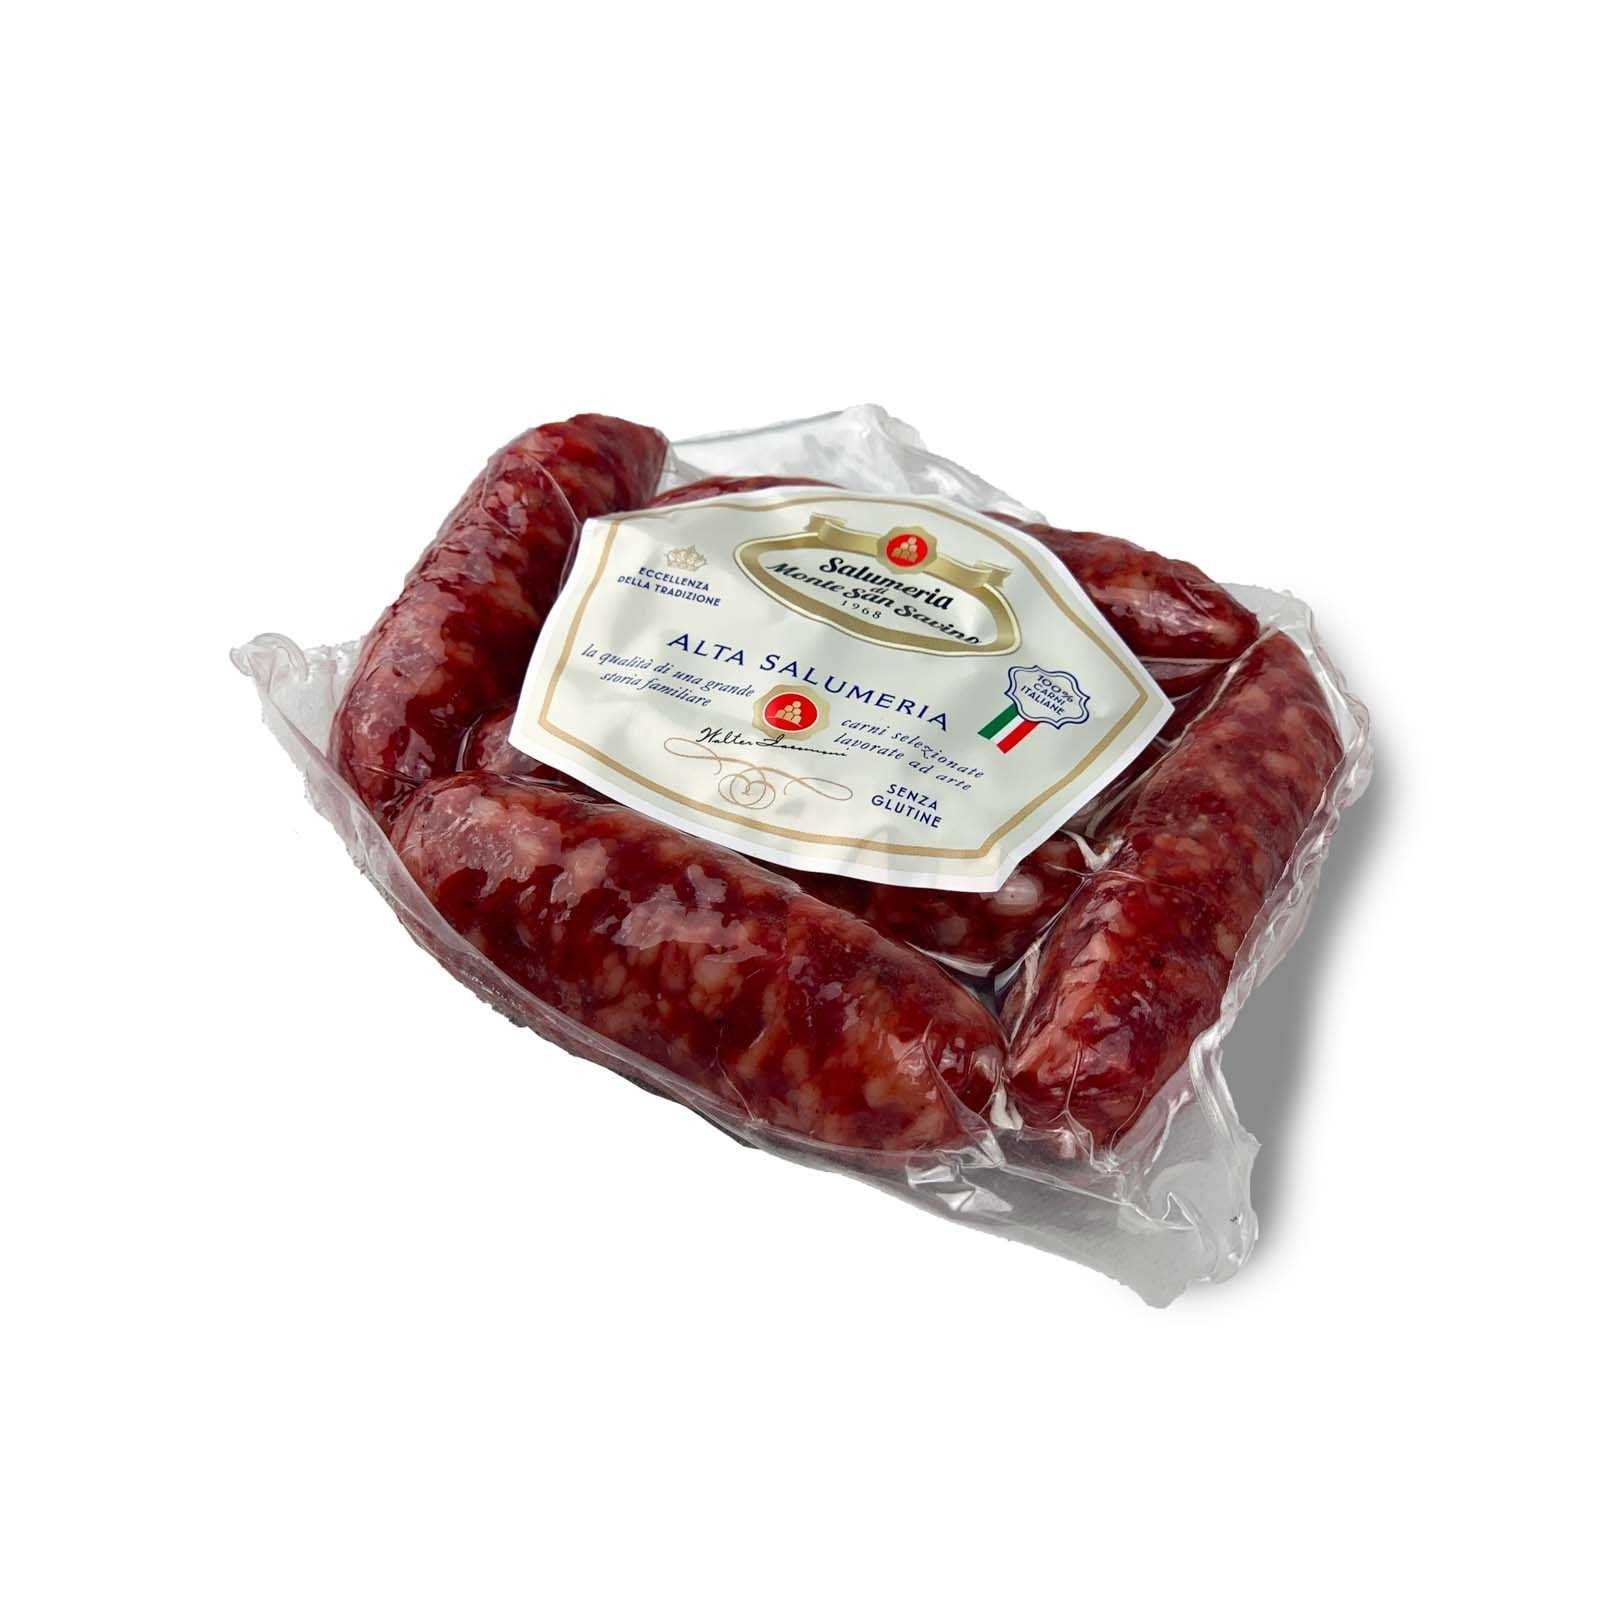 Within the vast amount of cured meats that characterize the ancient tuscan tradition, a place of honor certainly goes to Cured Pork Sausage. Always present both for a rich aperitif and for a quick sandwich, it is a dish appreciated at all ages for its pleasant flavor and spicy aromas typical of Tuscan cured meats. But not only Tuscany, because it is a highly appreciated cured meat also used in the rest of Italy and which boasts an excellent export.